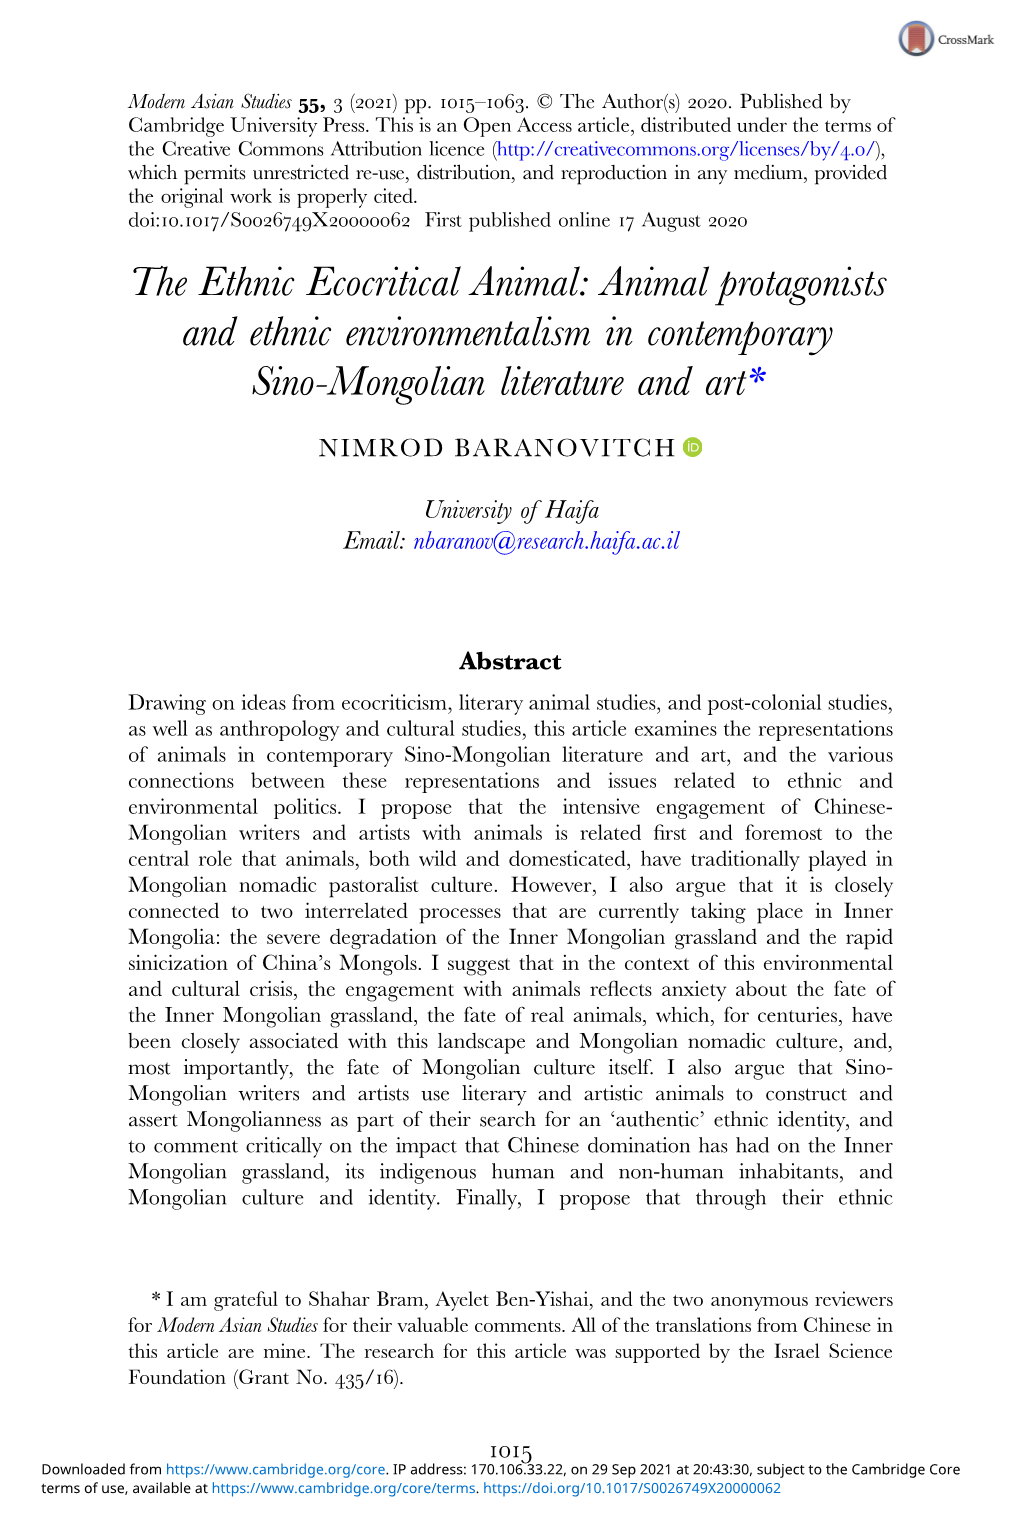 The Ethnic Ecocritical Animal: Animal Protagonists and Ethnic Environmentalism in Contemporary Sino-Mongolian Literature and Art*